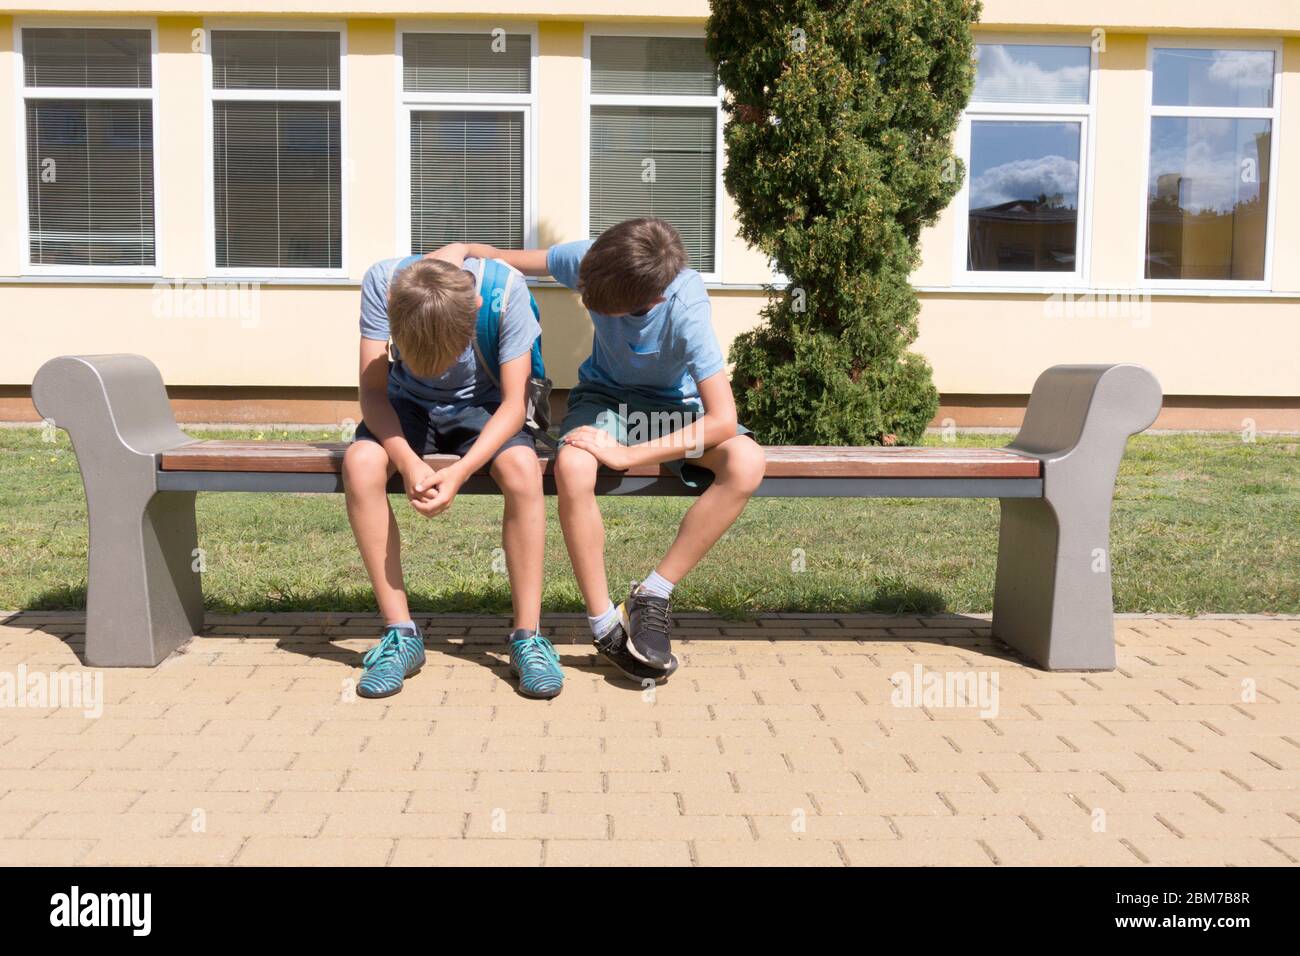 Kid comforting consoling upset sad friend in school yard. Problems at school, learning difficulties. Stock Photo